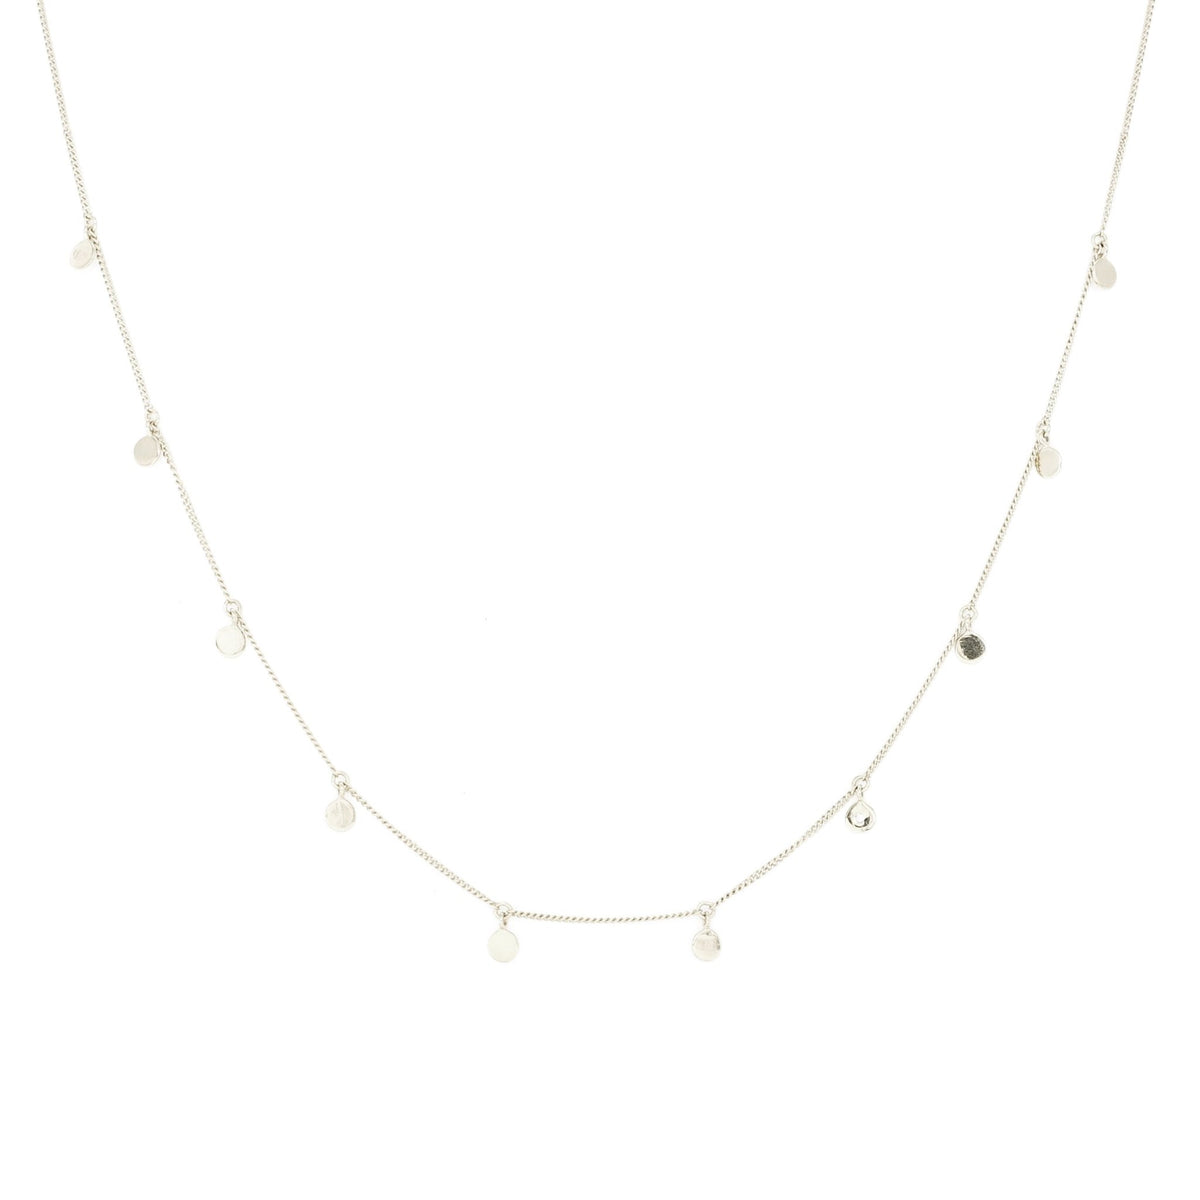 DAINTY POISE DISK NECKLACE - CUBIC ZIRCONIA &amp; SILVER - SO PRETTY CARA COTTER